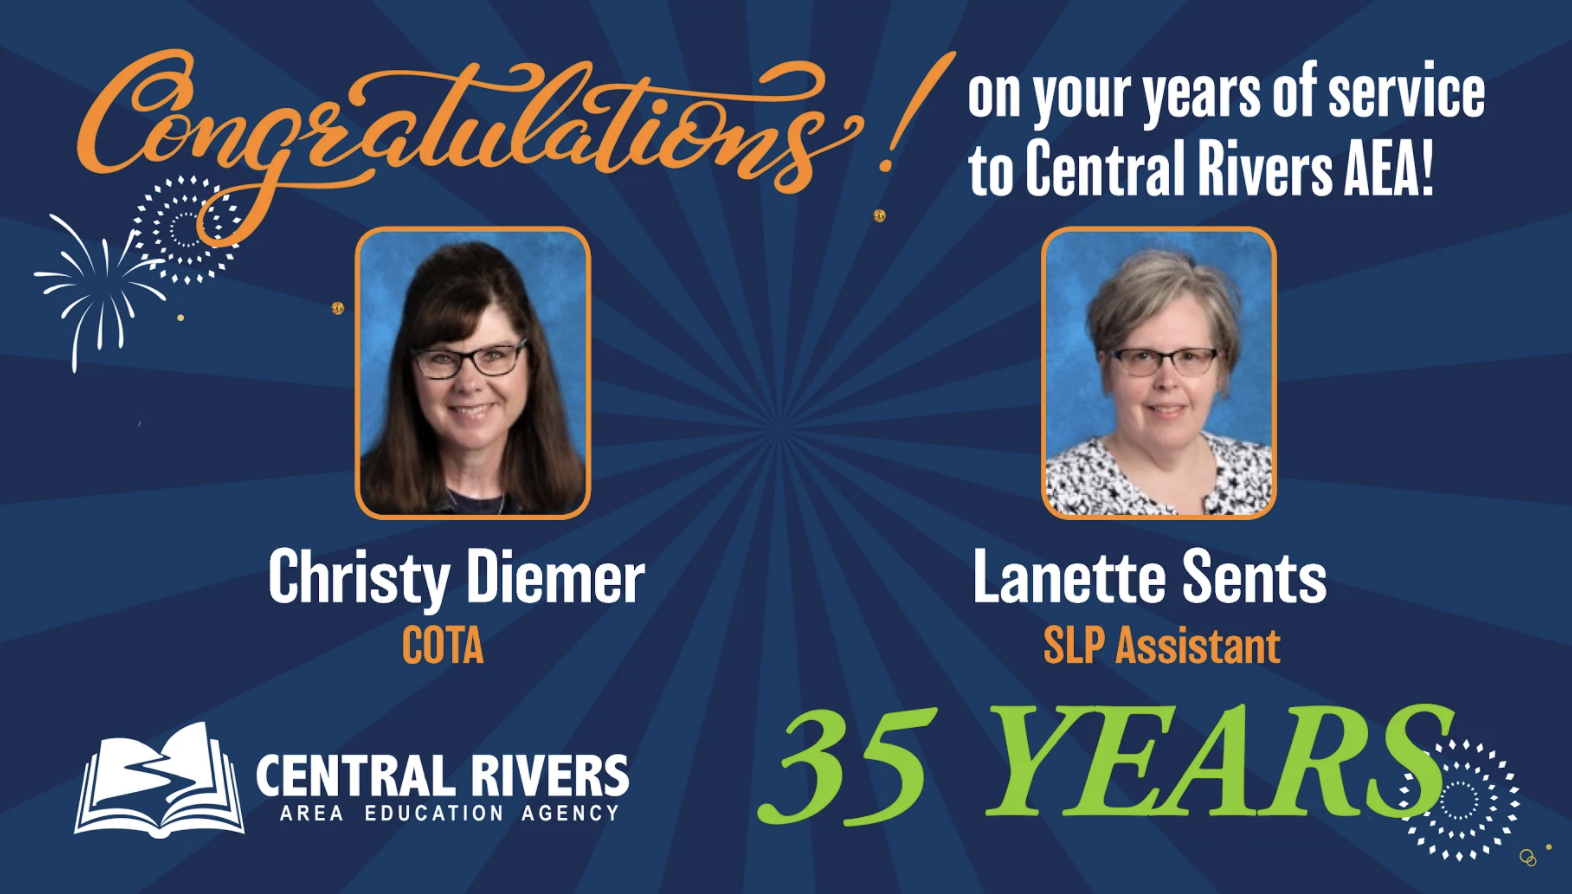 Graphic of staff members who have served Central Rivers AEA for 35 years including Christy Diemer and Lanette Sents